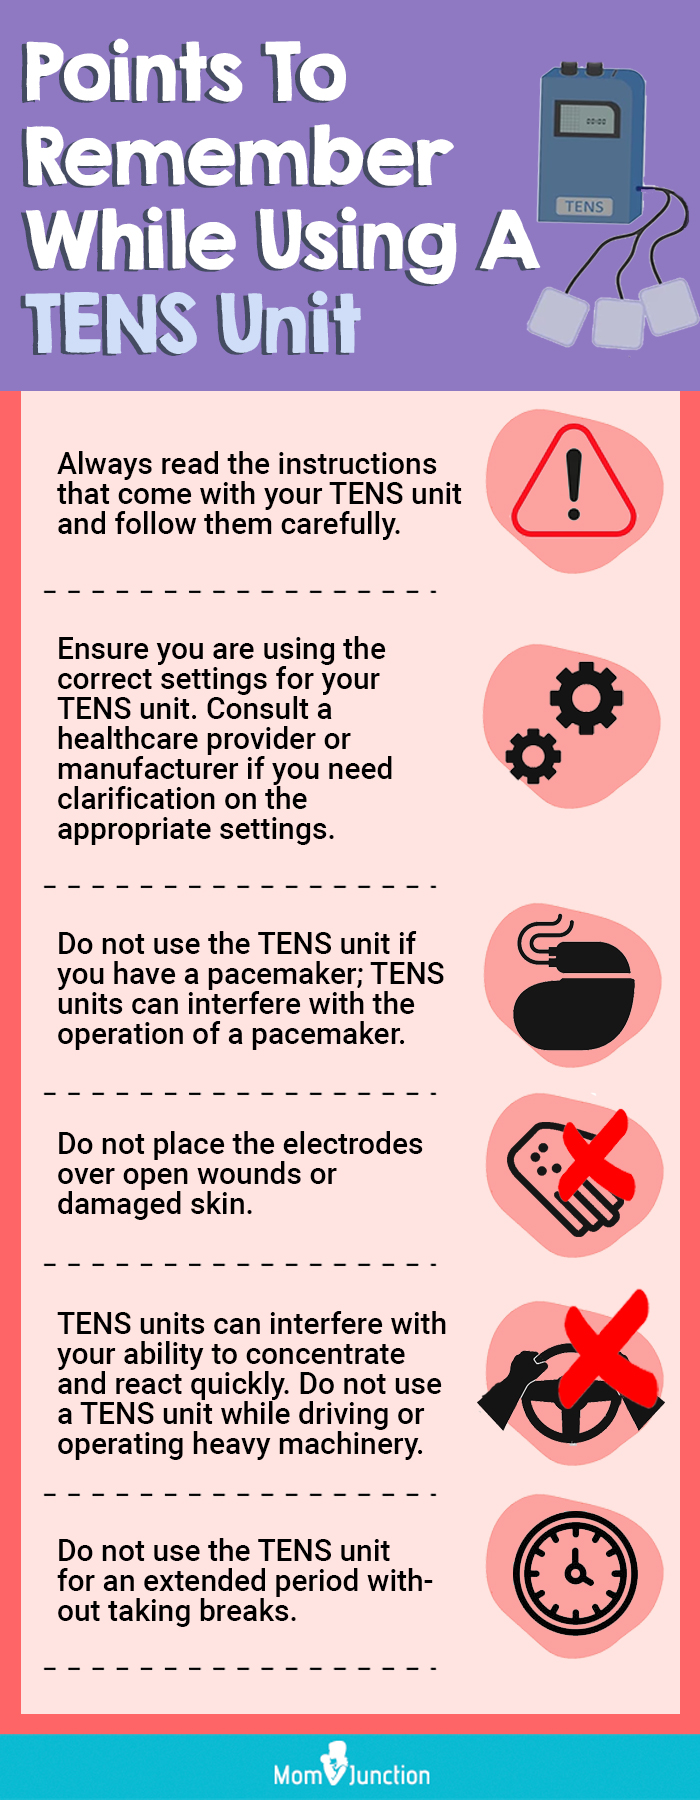 Points To Remember While Using A TENS Unit (infographic)